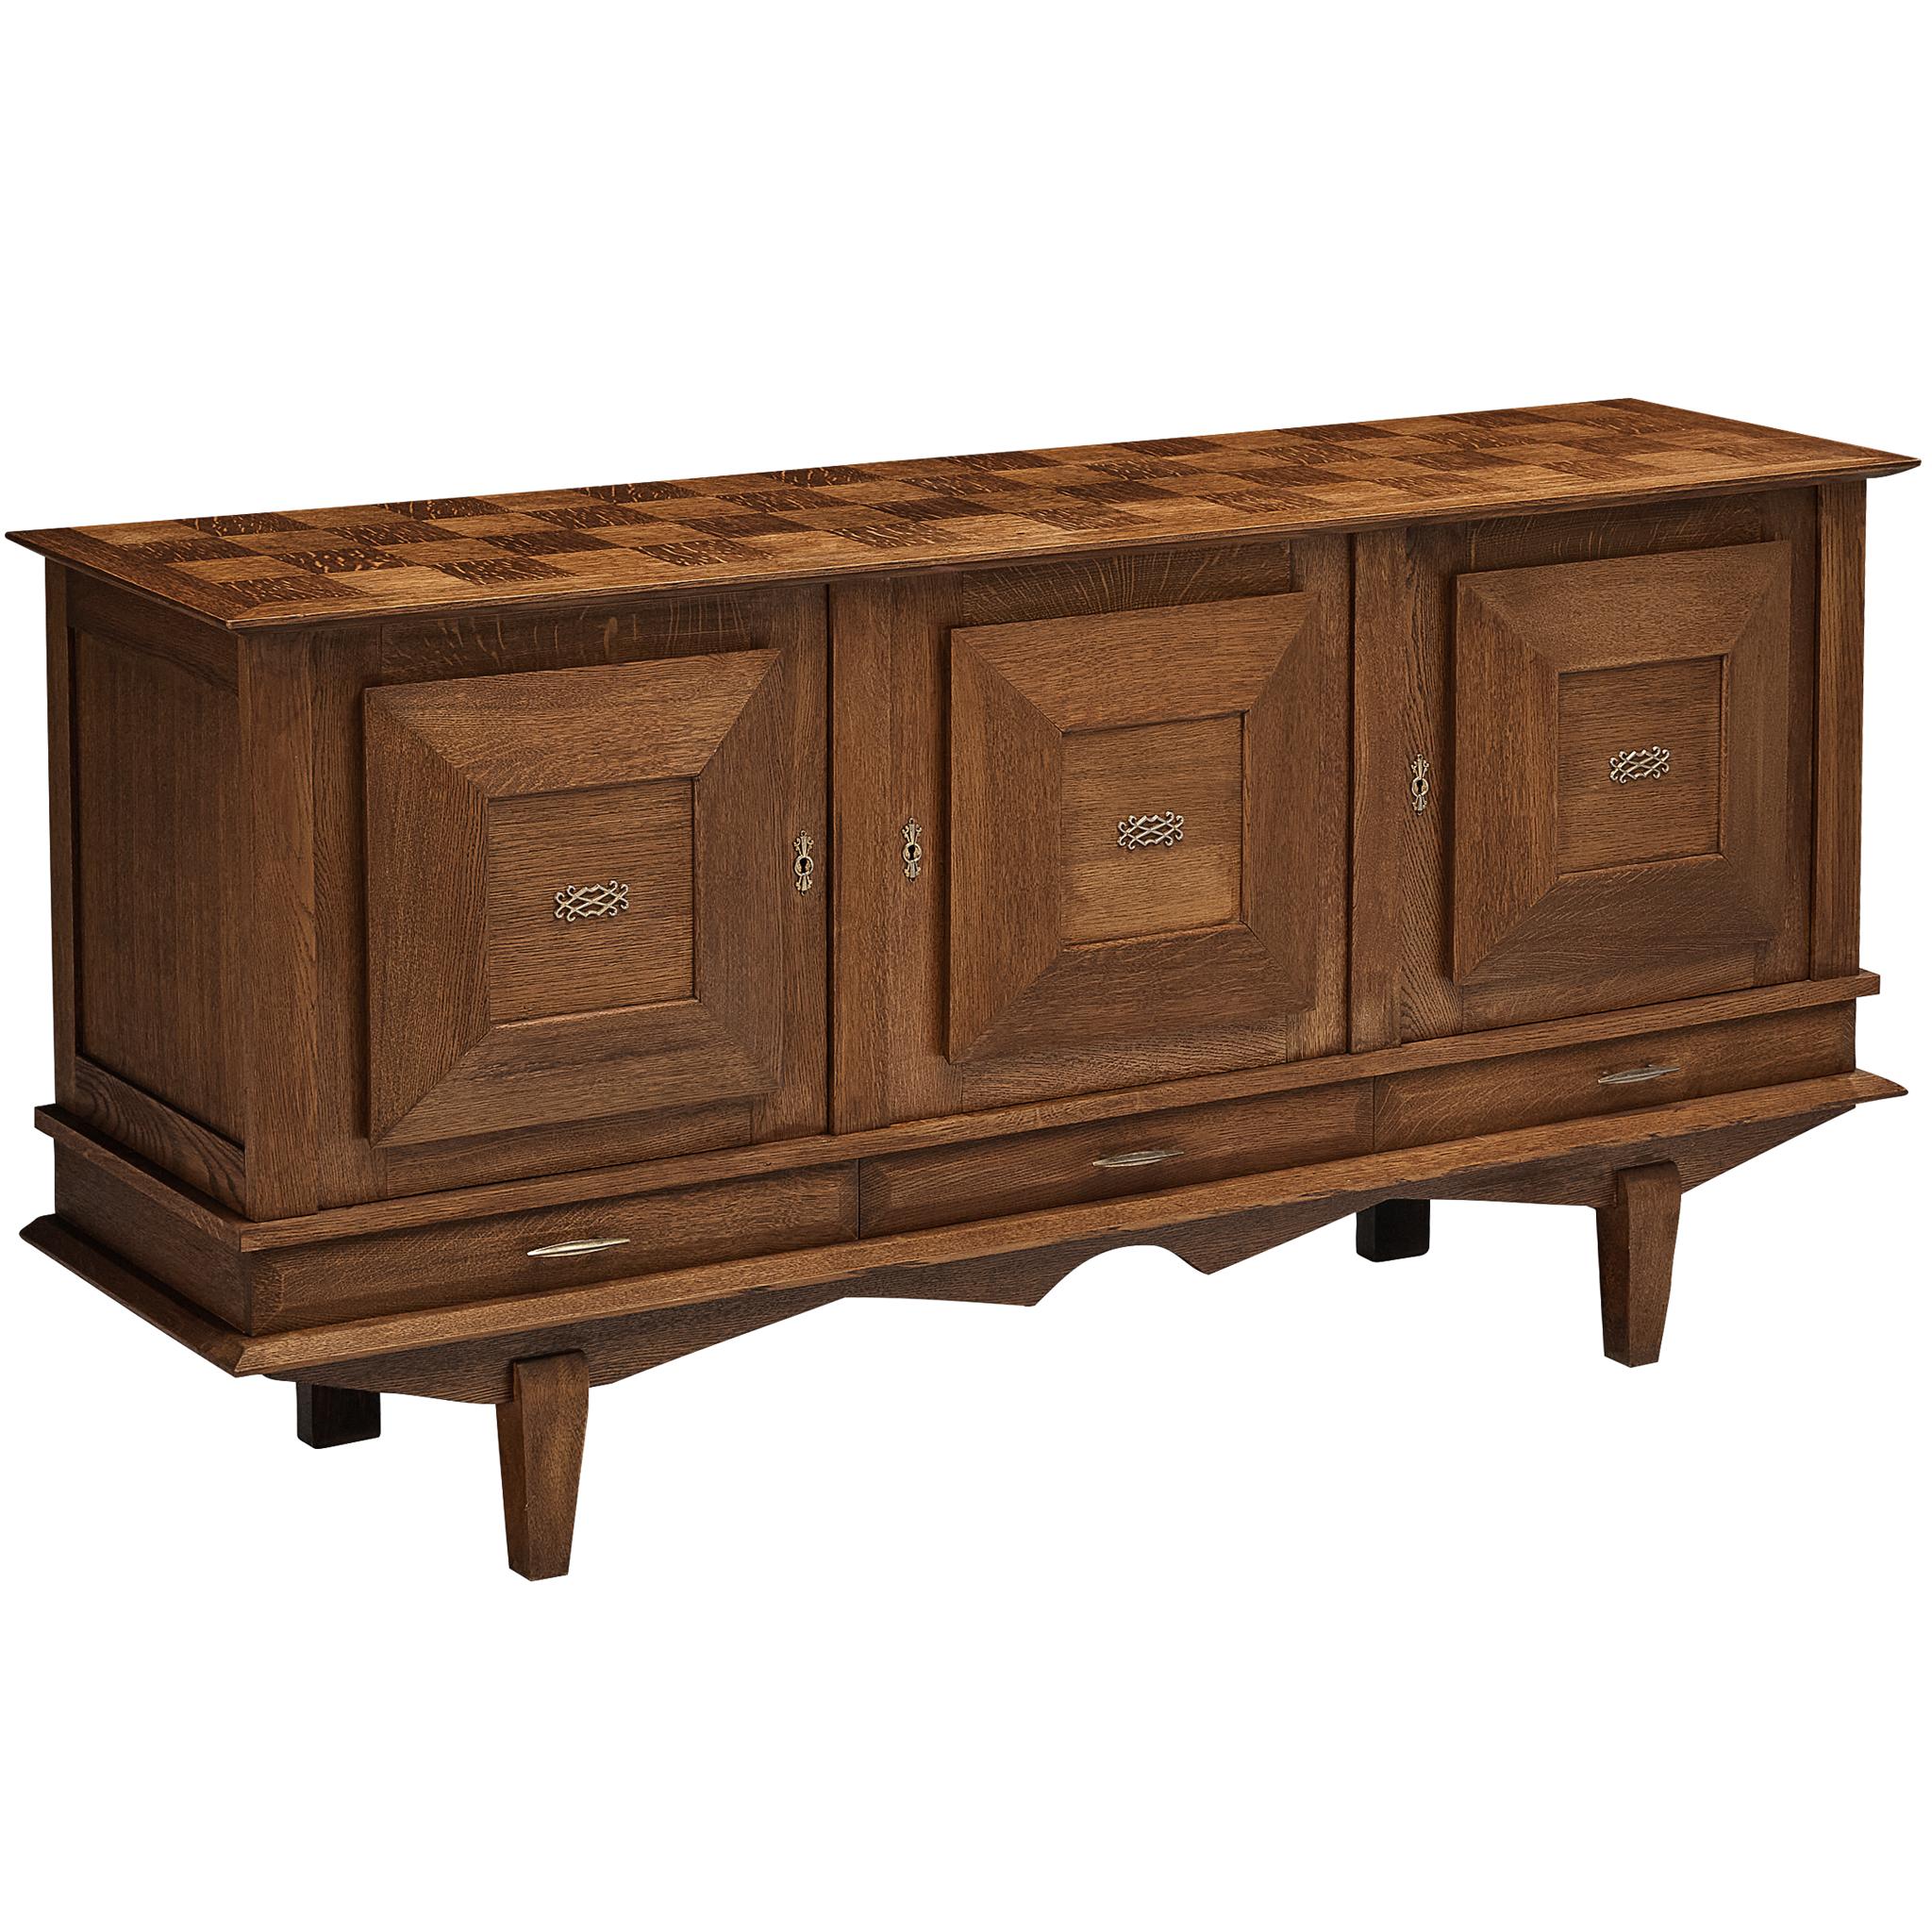 Sideboard, oak, brass, France, 1940s

Three-door sideboard with Art Deco characteristics. The geometrically inlayed top and attentively designed doors, contribute to a special design. With its three-dimensional feel, the sideboard lays full focus on